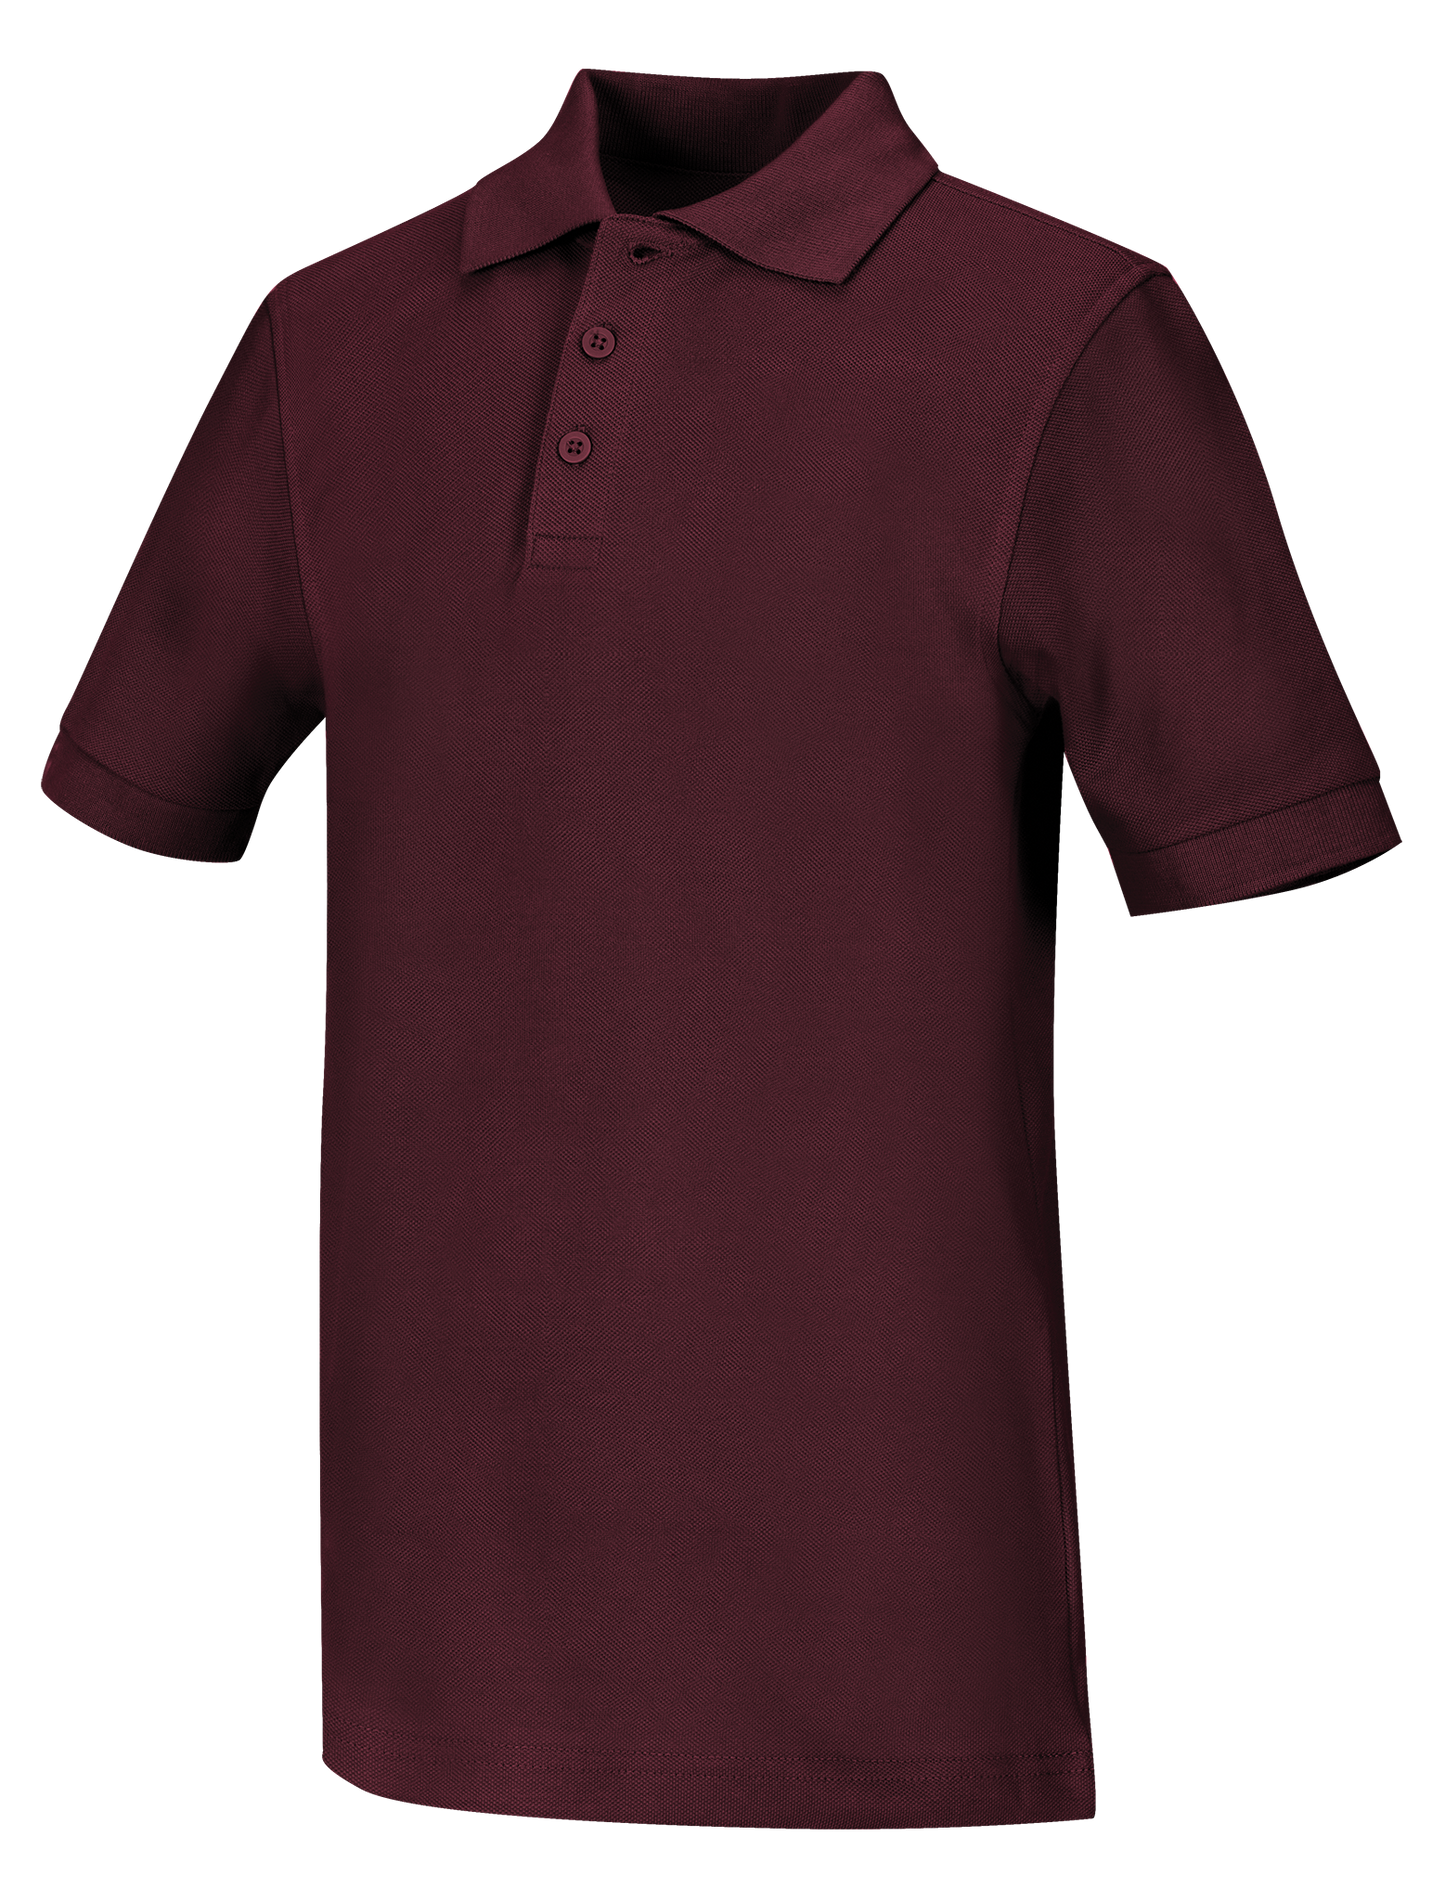 OLD Fit Youth Unisex Short Sleeve Pique Polo